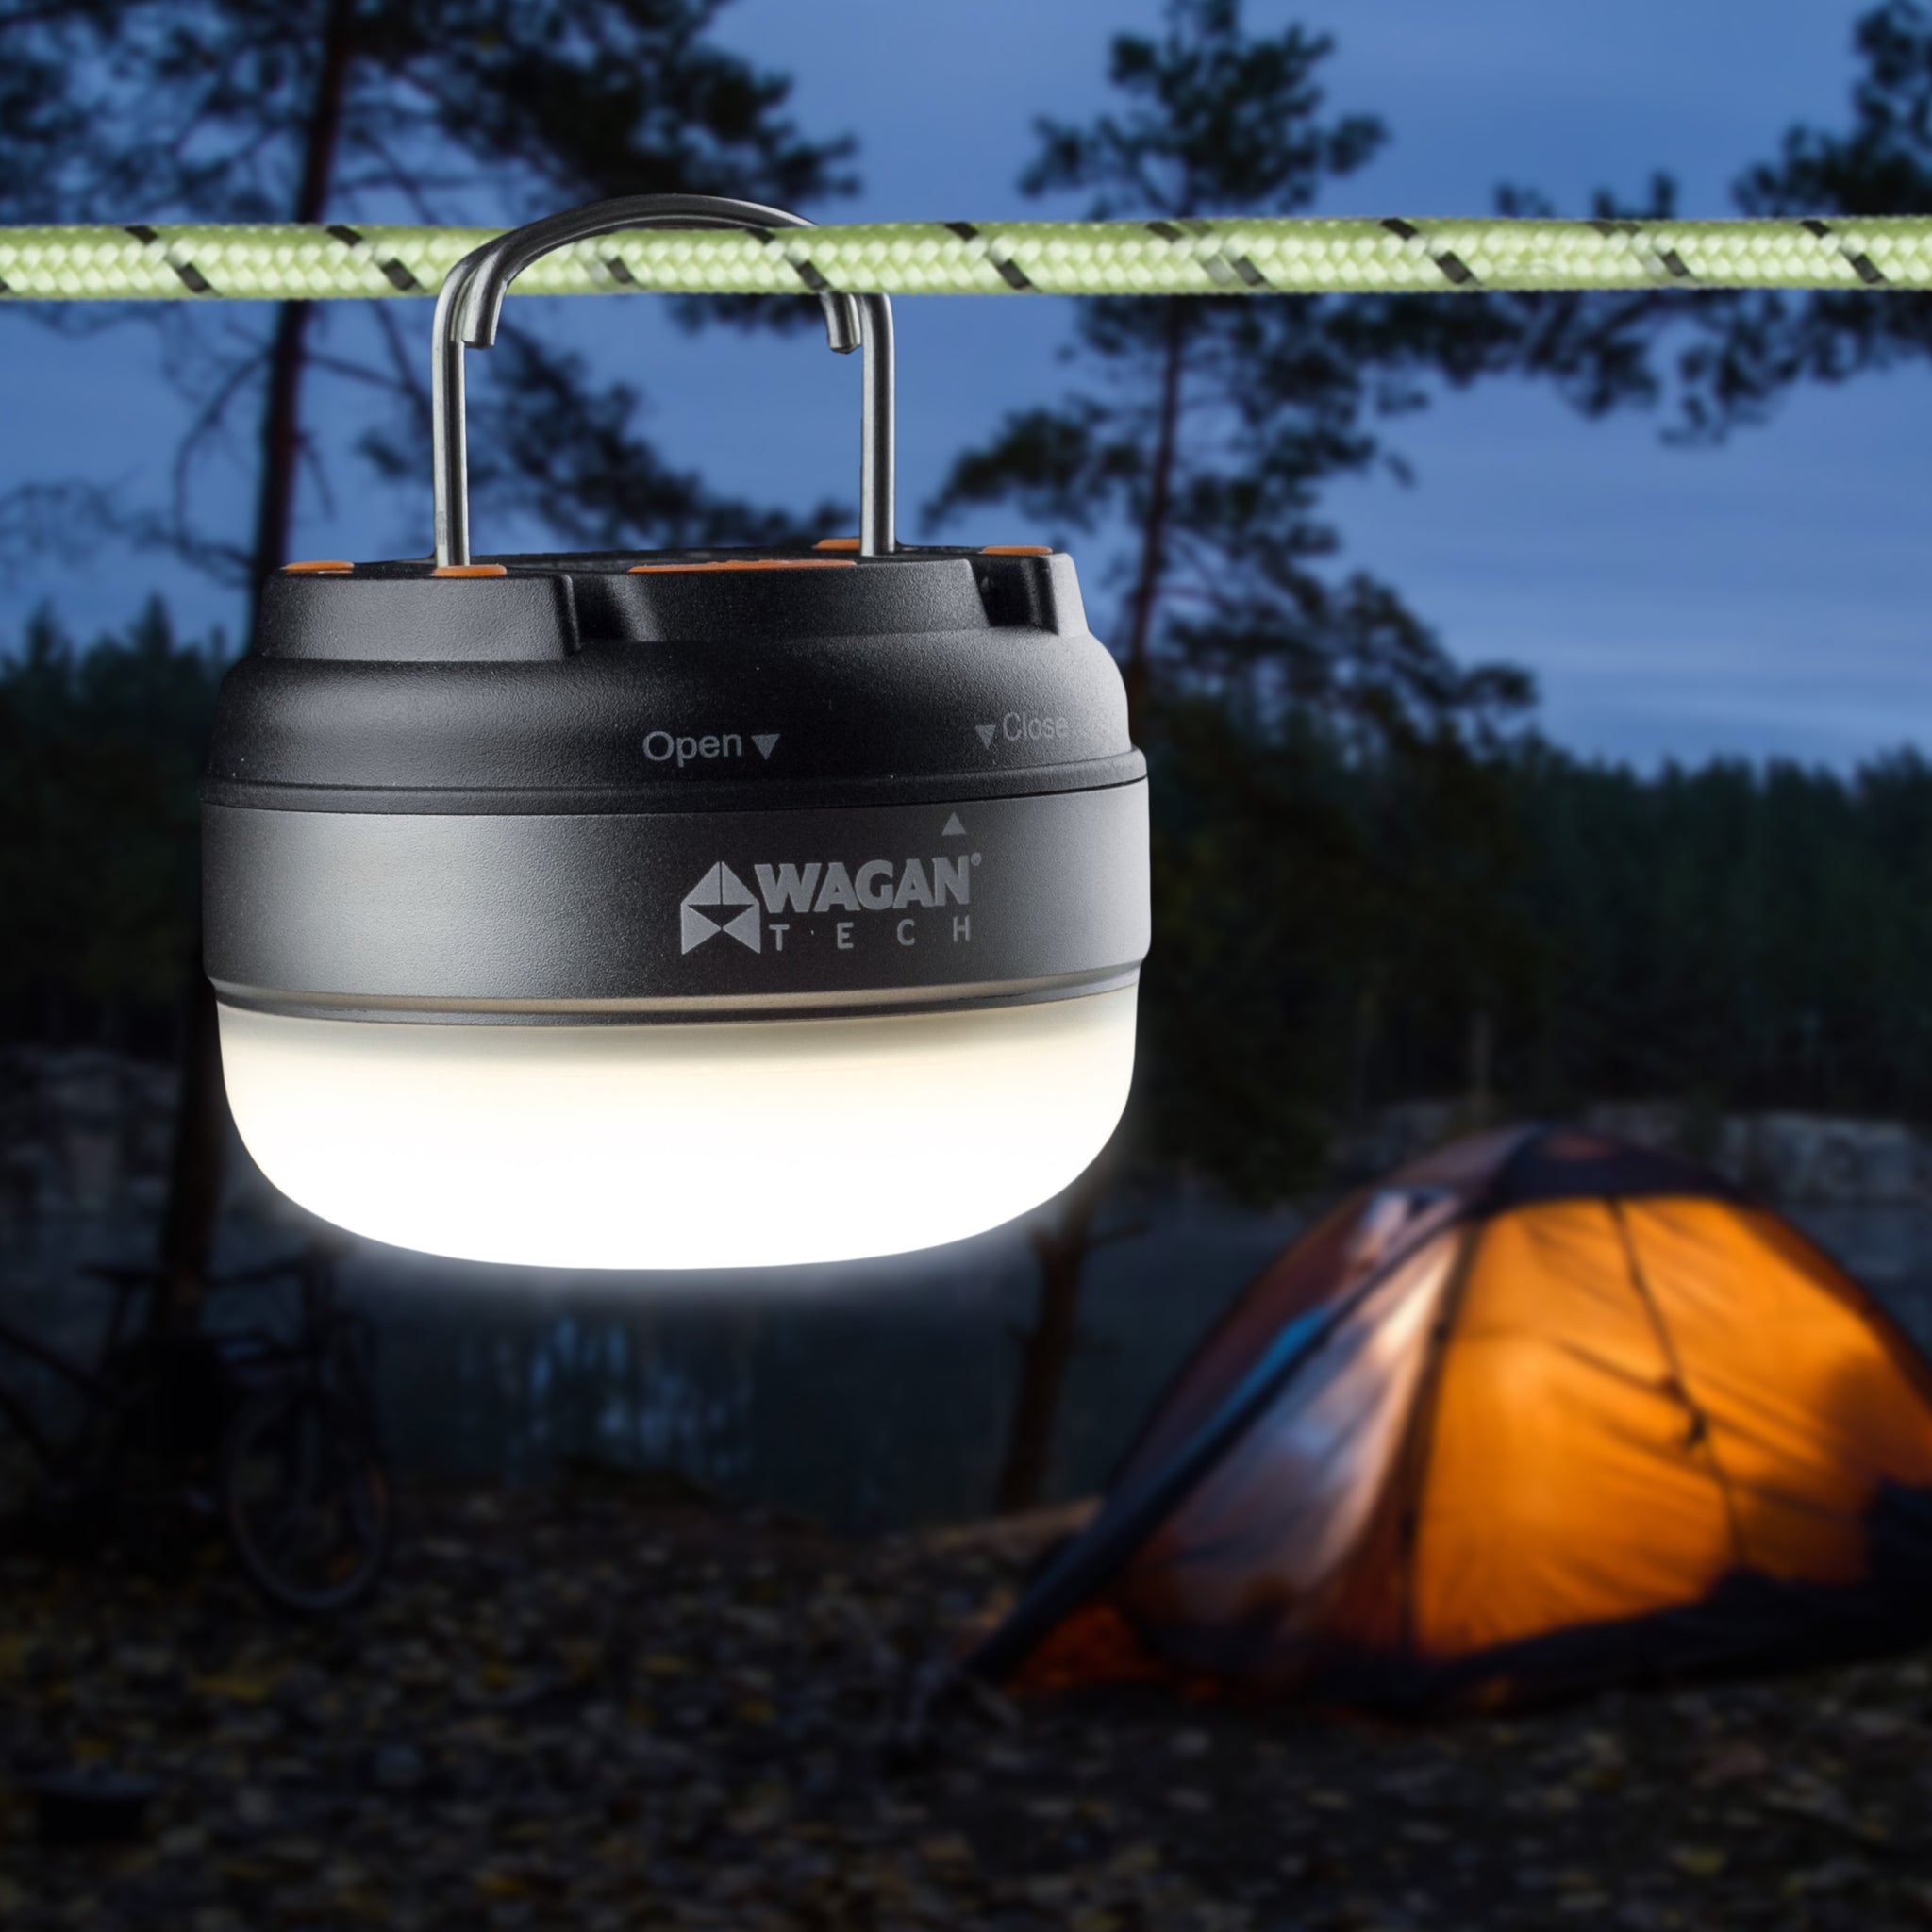 Wagan Tech Dome Lantern: Perfect for Camping, OverlandingKit, Emergencies,  Power outages, and everyday use!